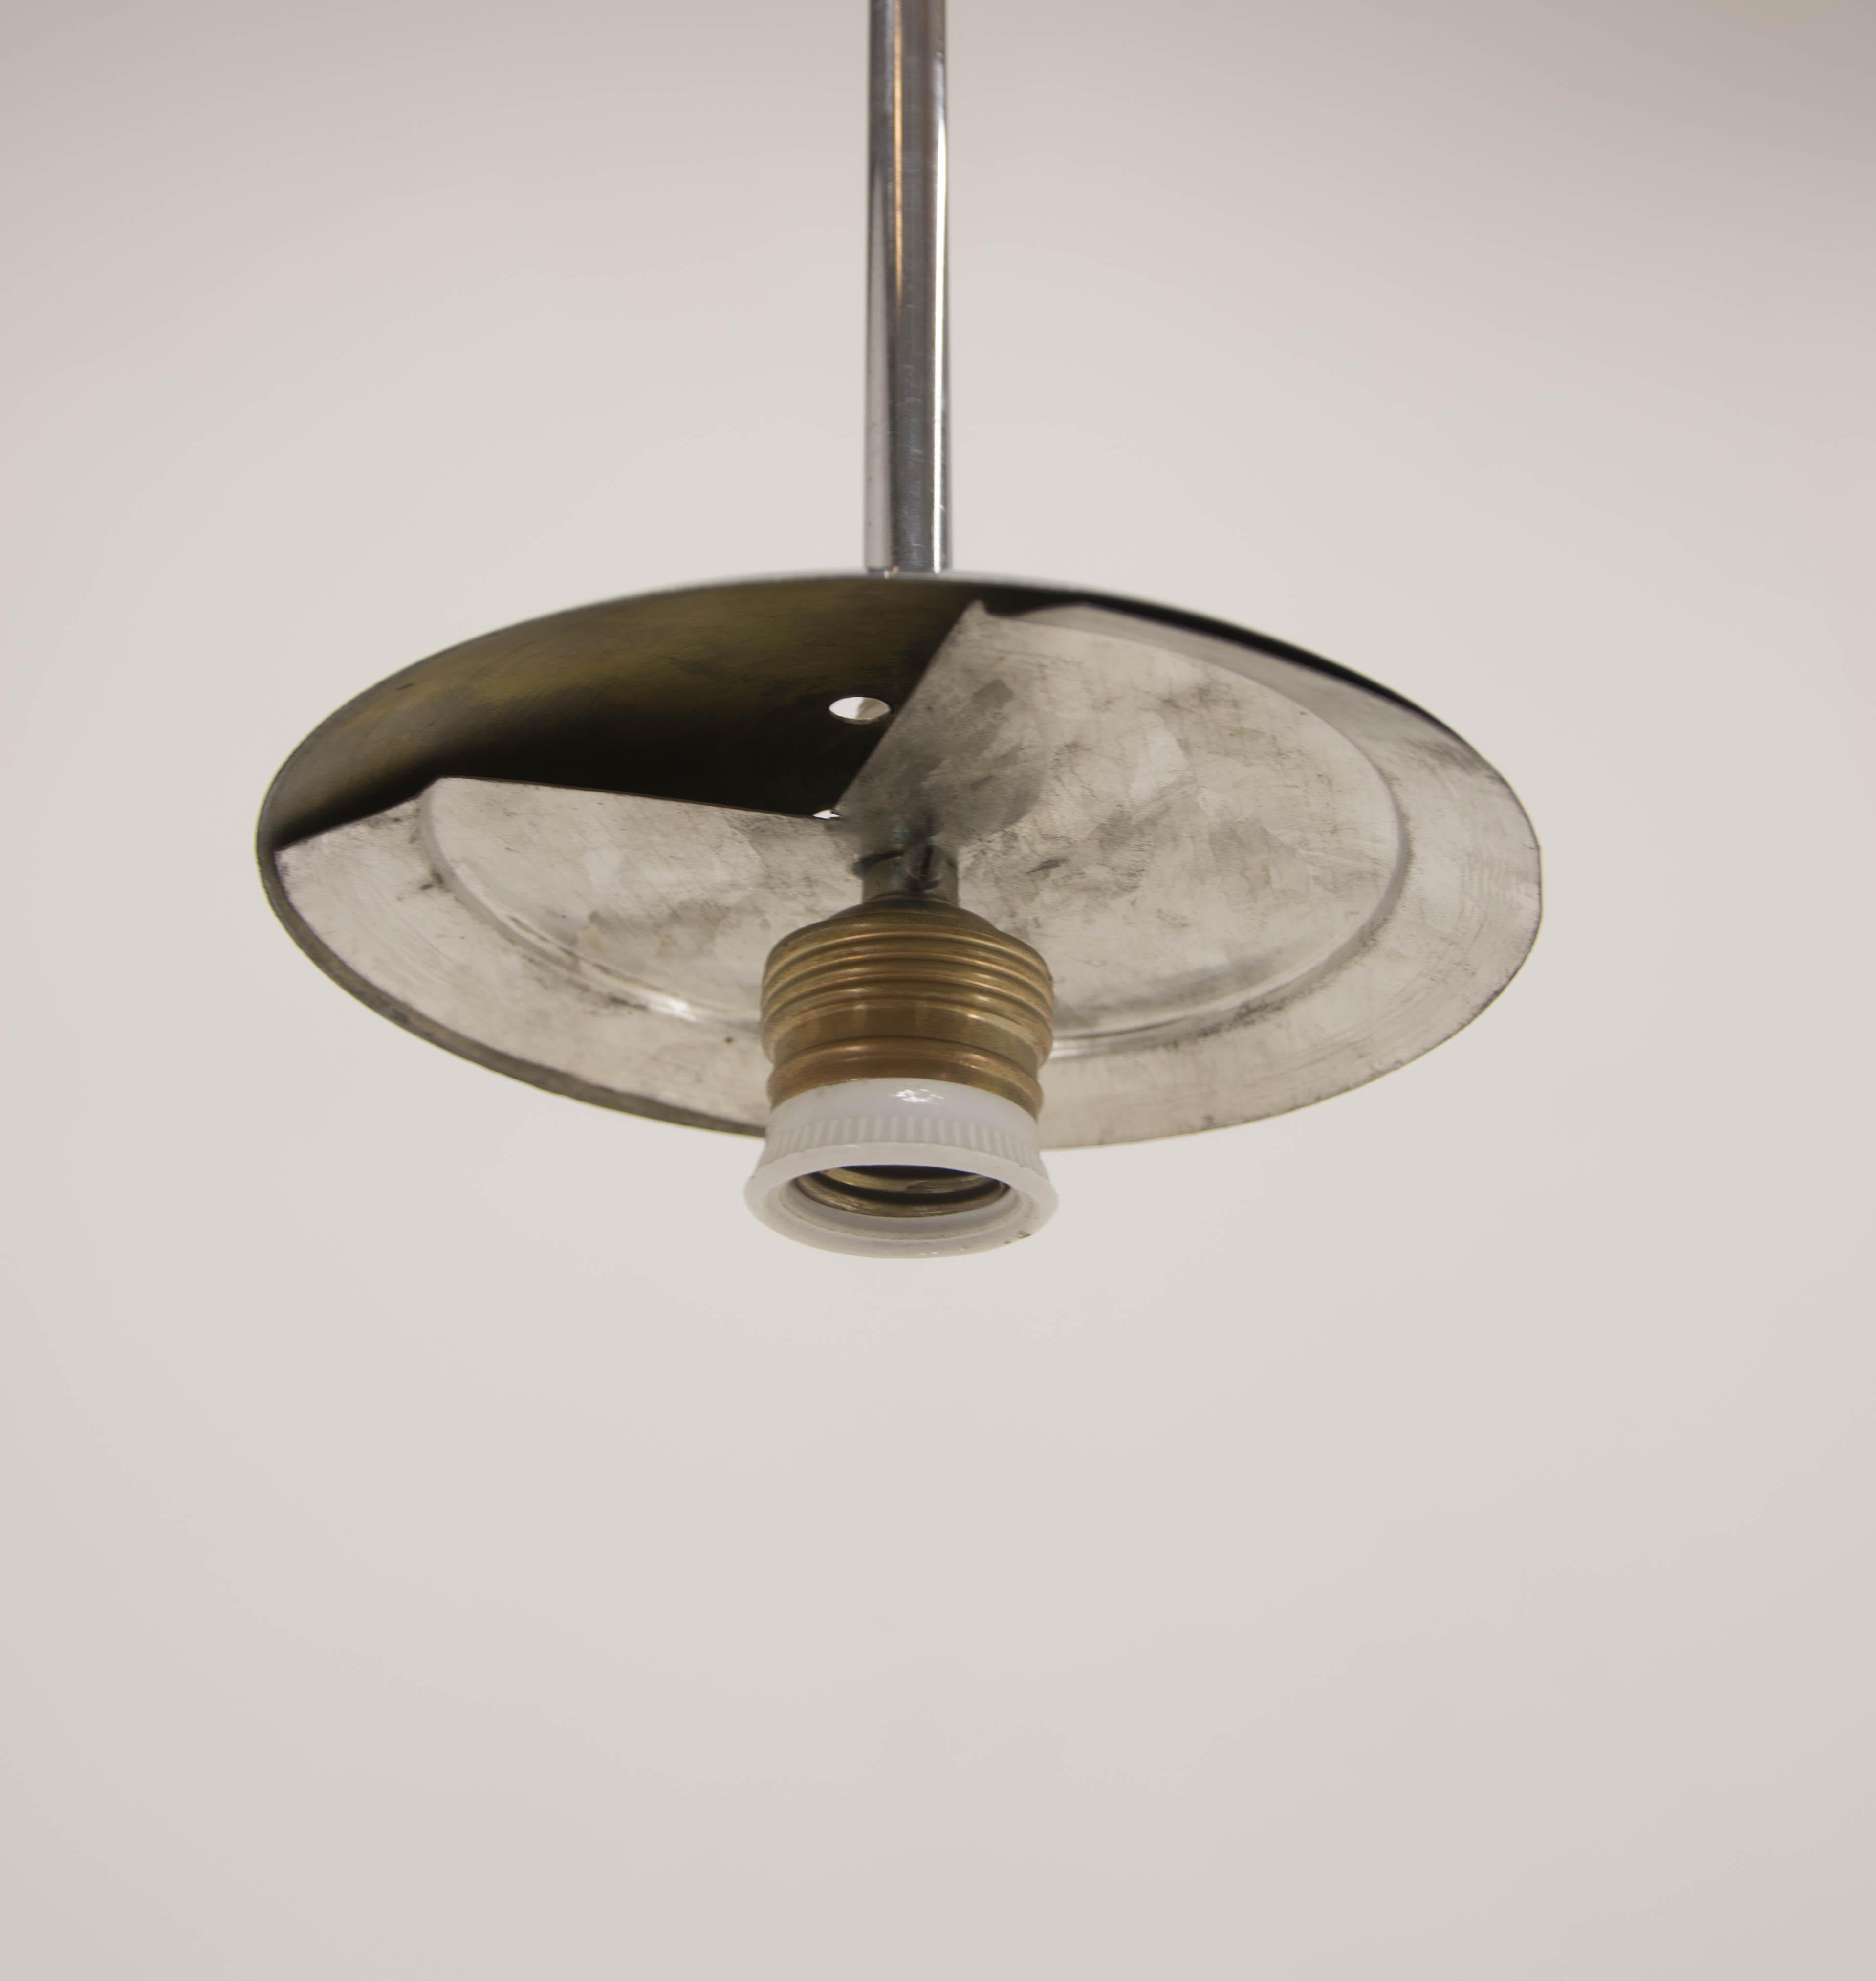 Chrome-Plated Bauhaus Minimalistic Chandelier by Franta Anyz, Type 5878, 1930s For Sale 1